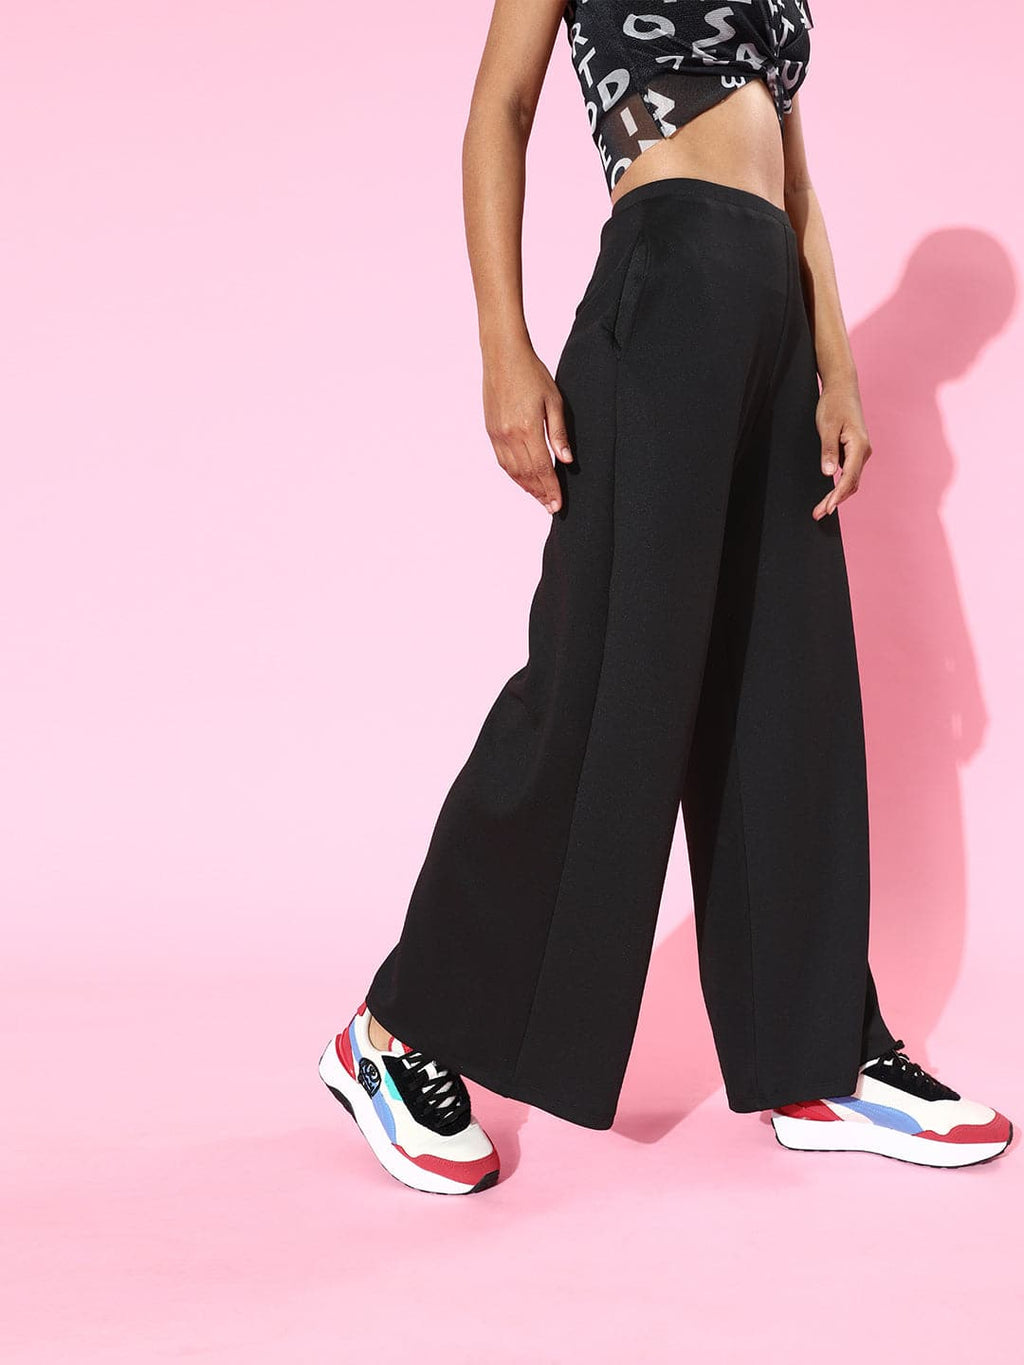 Scuba Pants for Women - Up to 72% off